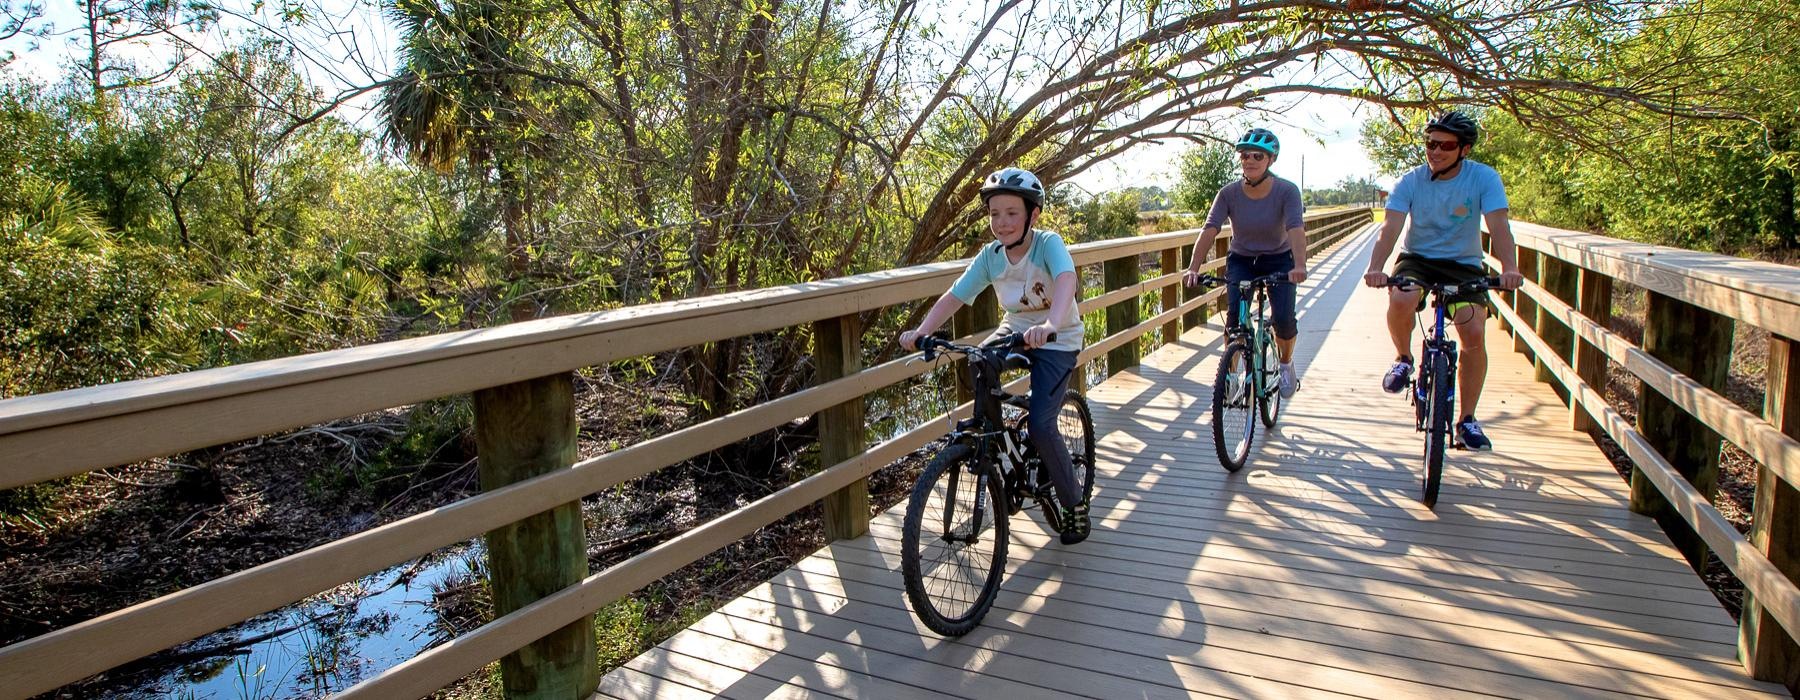 a family riding their bicycles across a wooden park bridge